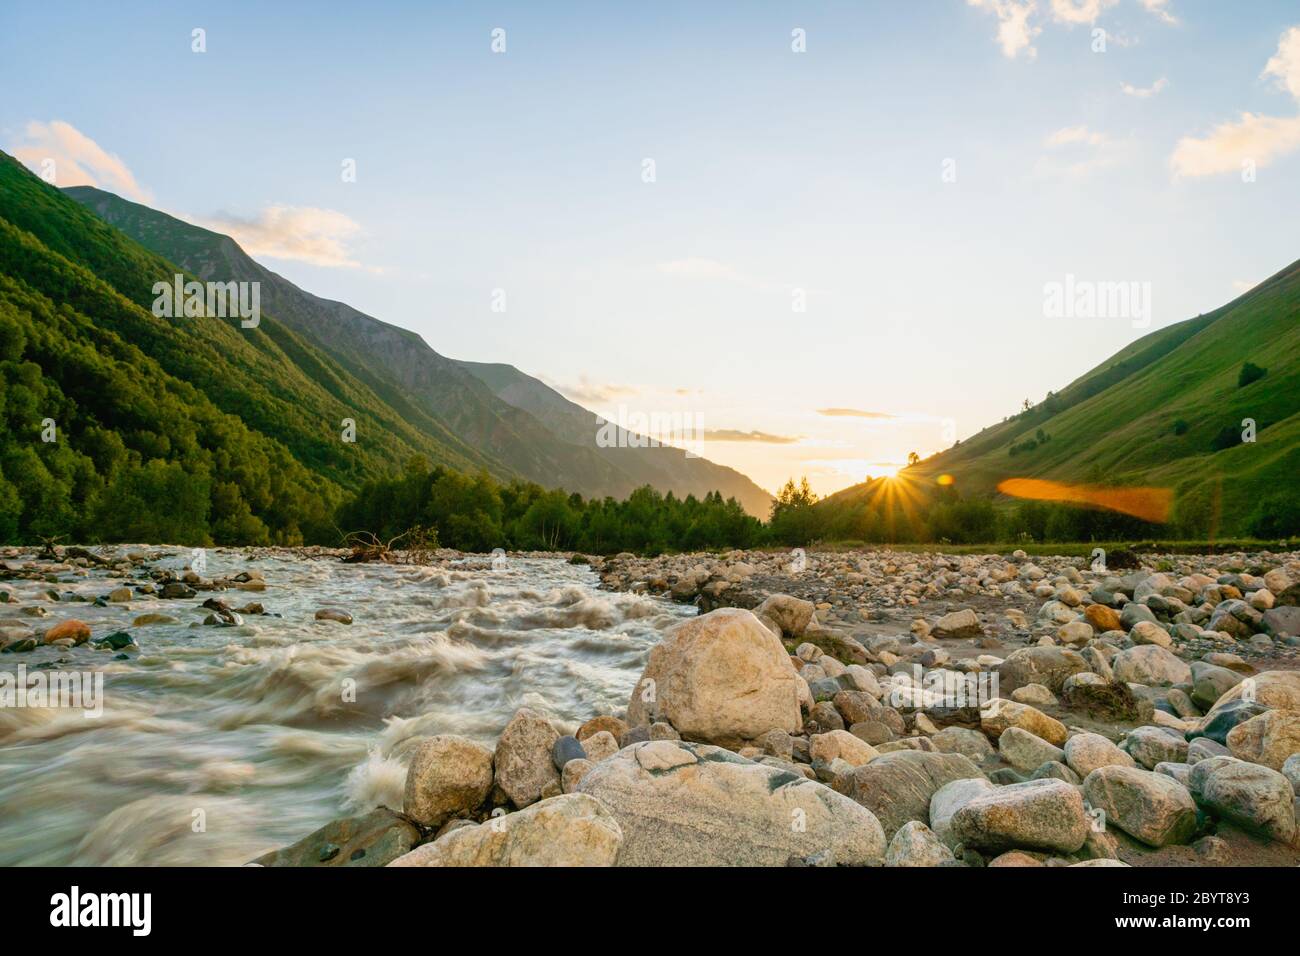 Svaneti landscape at sunset with mountains and river on the trekking and hiking route near Mestia village in Svaneti region, Georgia. Stock Photo